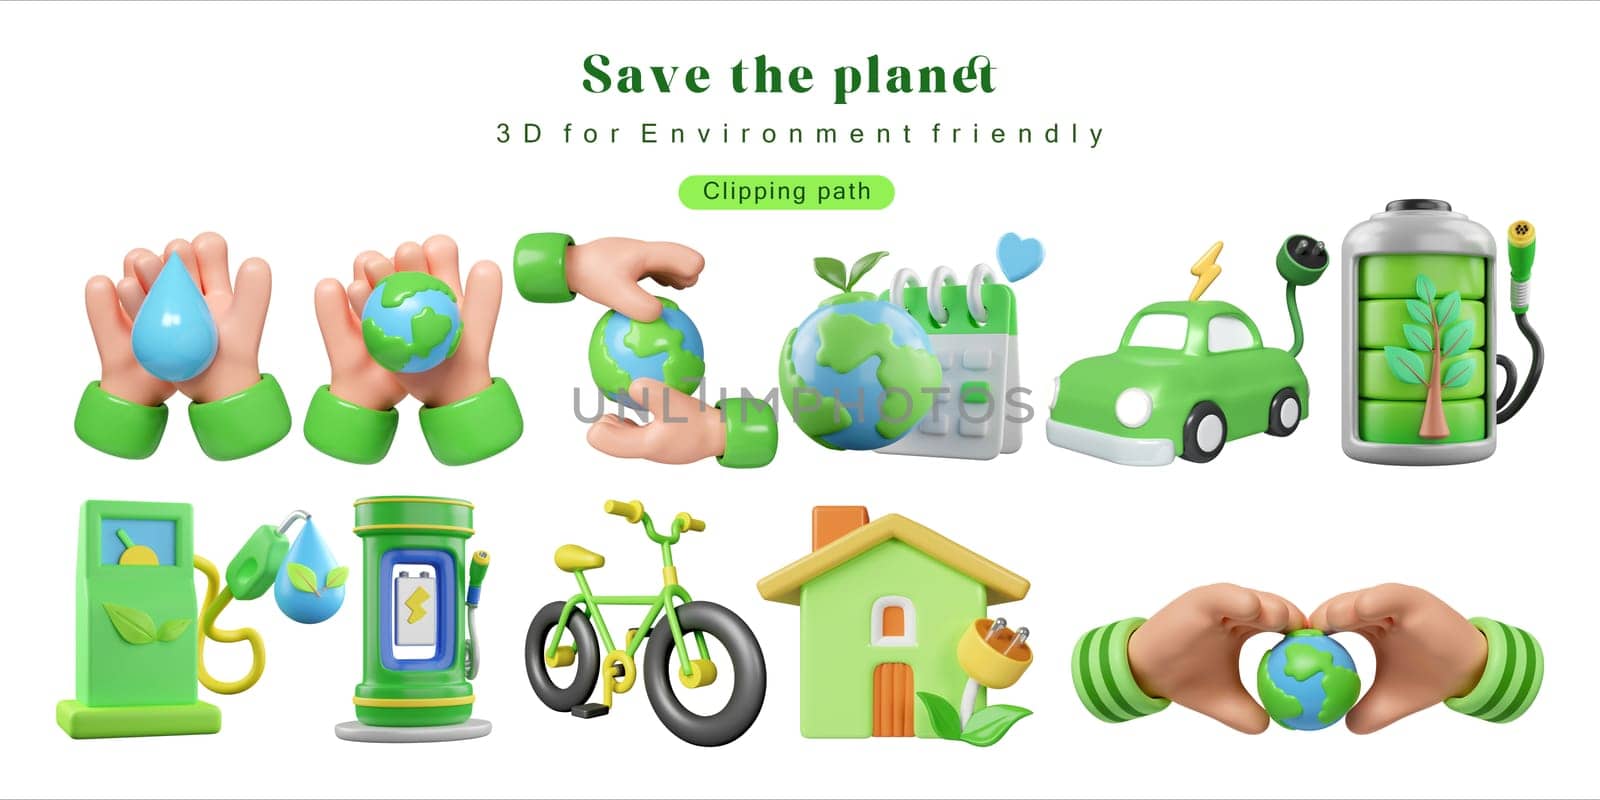 Eco Global Warming icon set Illustration Eco global warming icons for Environment protection, save the planet, for poster, web, social media post.3D Illustration by meepiangraphic